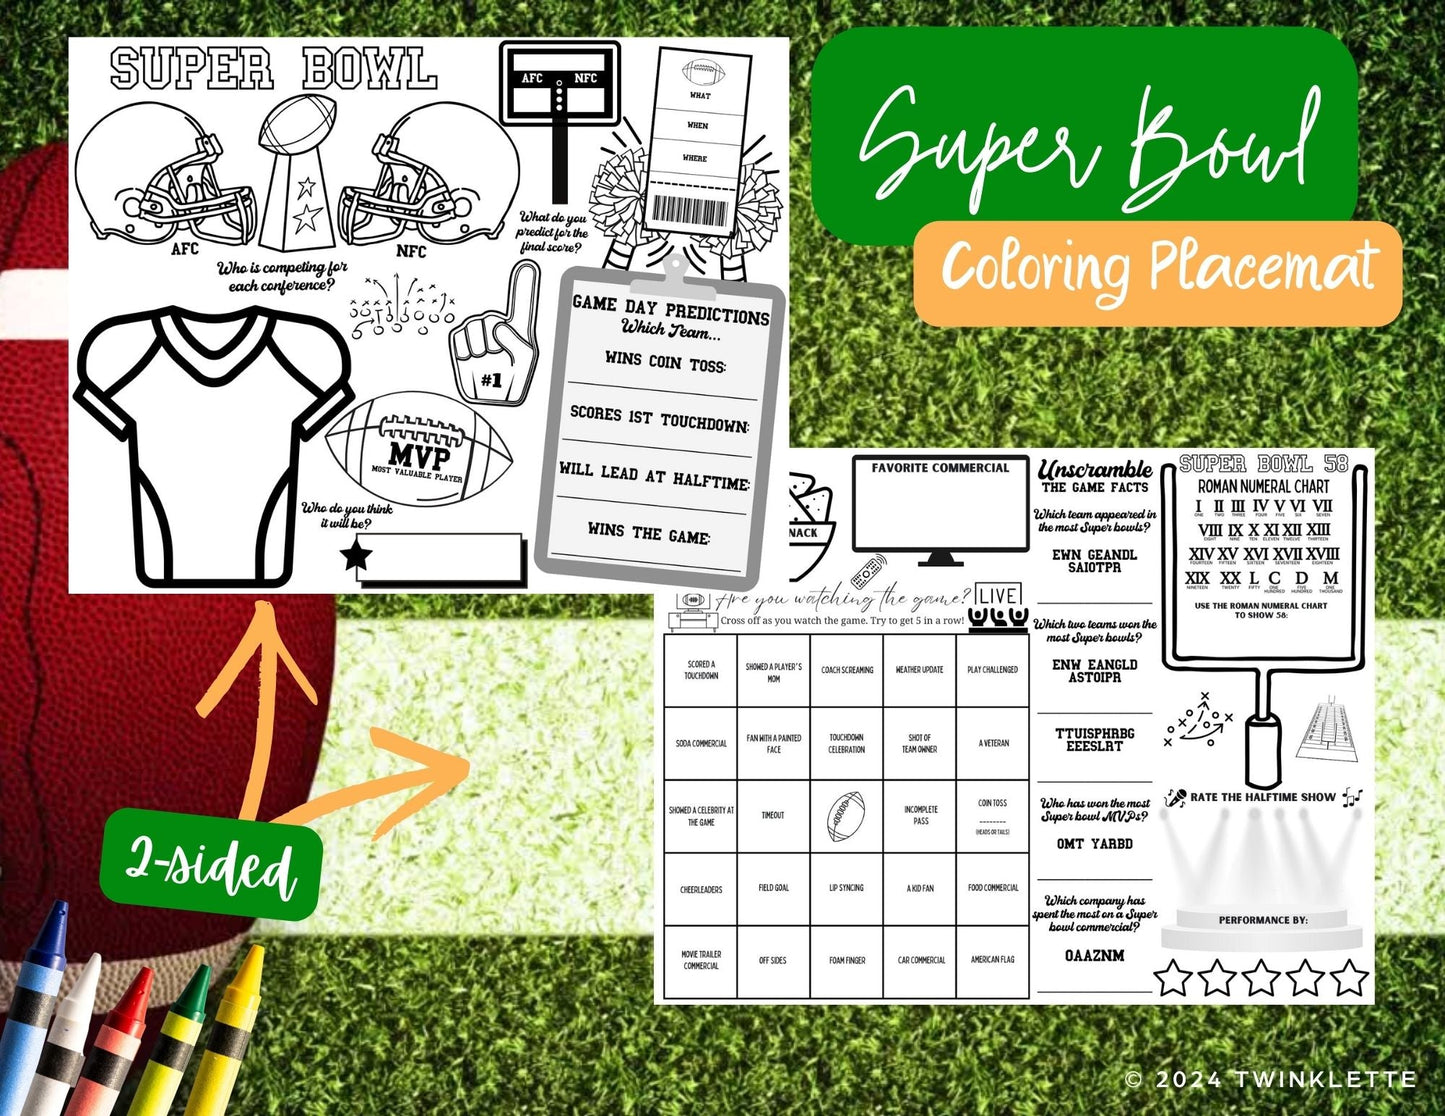 Super Bowl Activity Placemat: Engaging Football Fun for Kids and Adults - Predictions, Game Facts, Bingo and More! - Twinklette